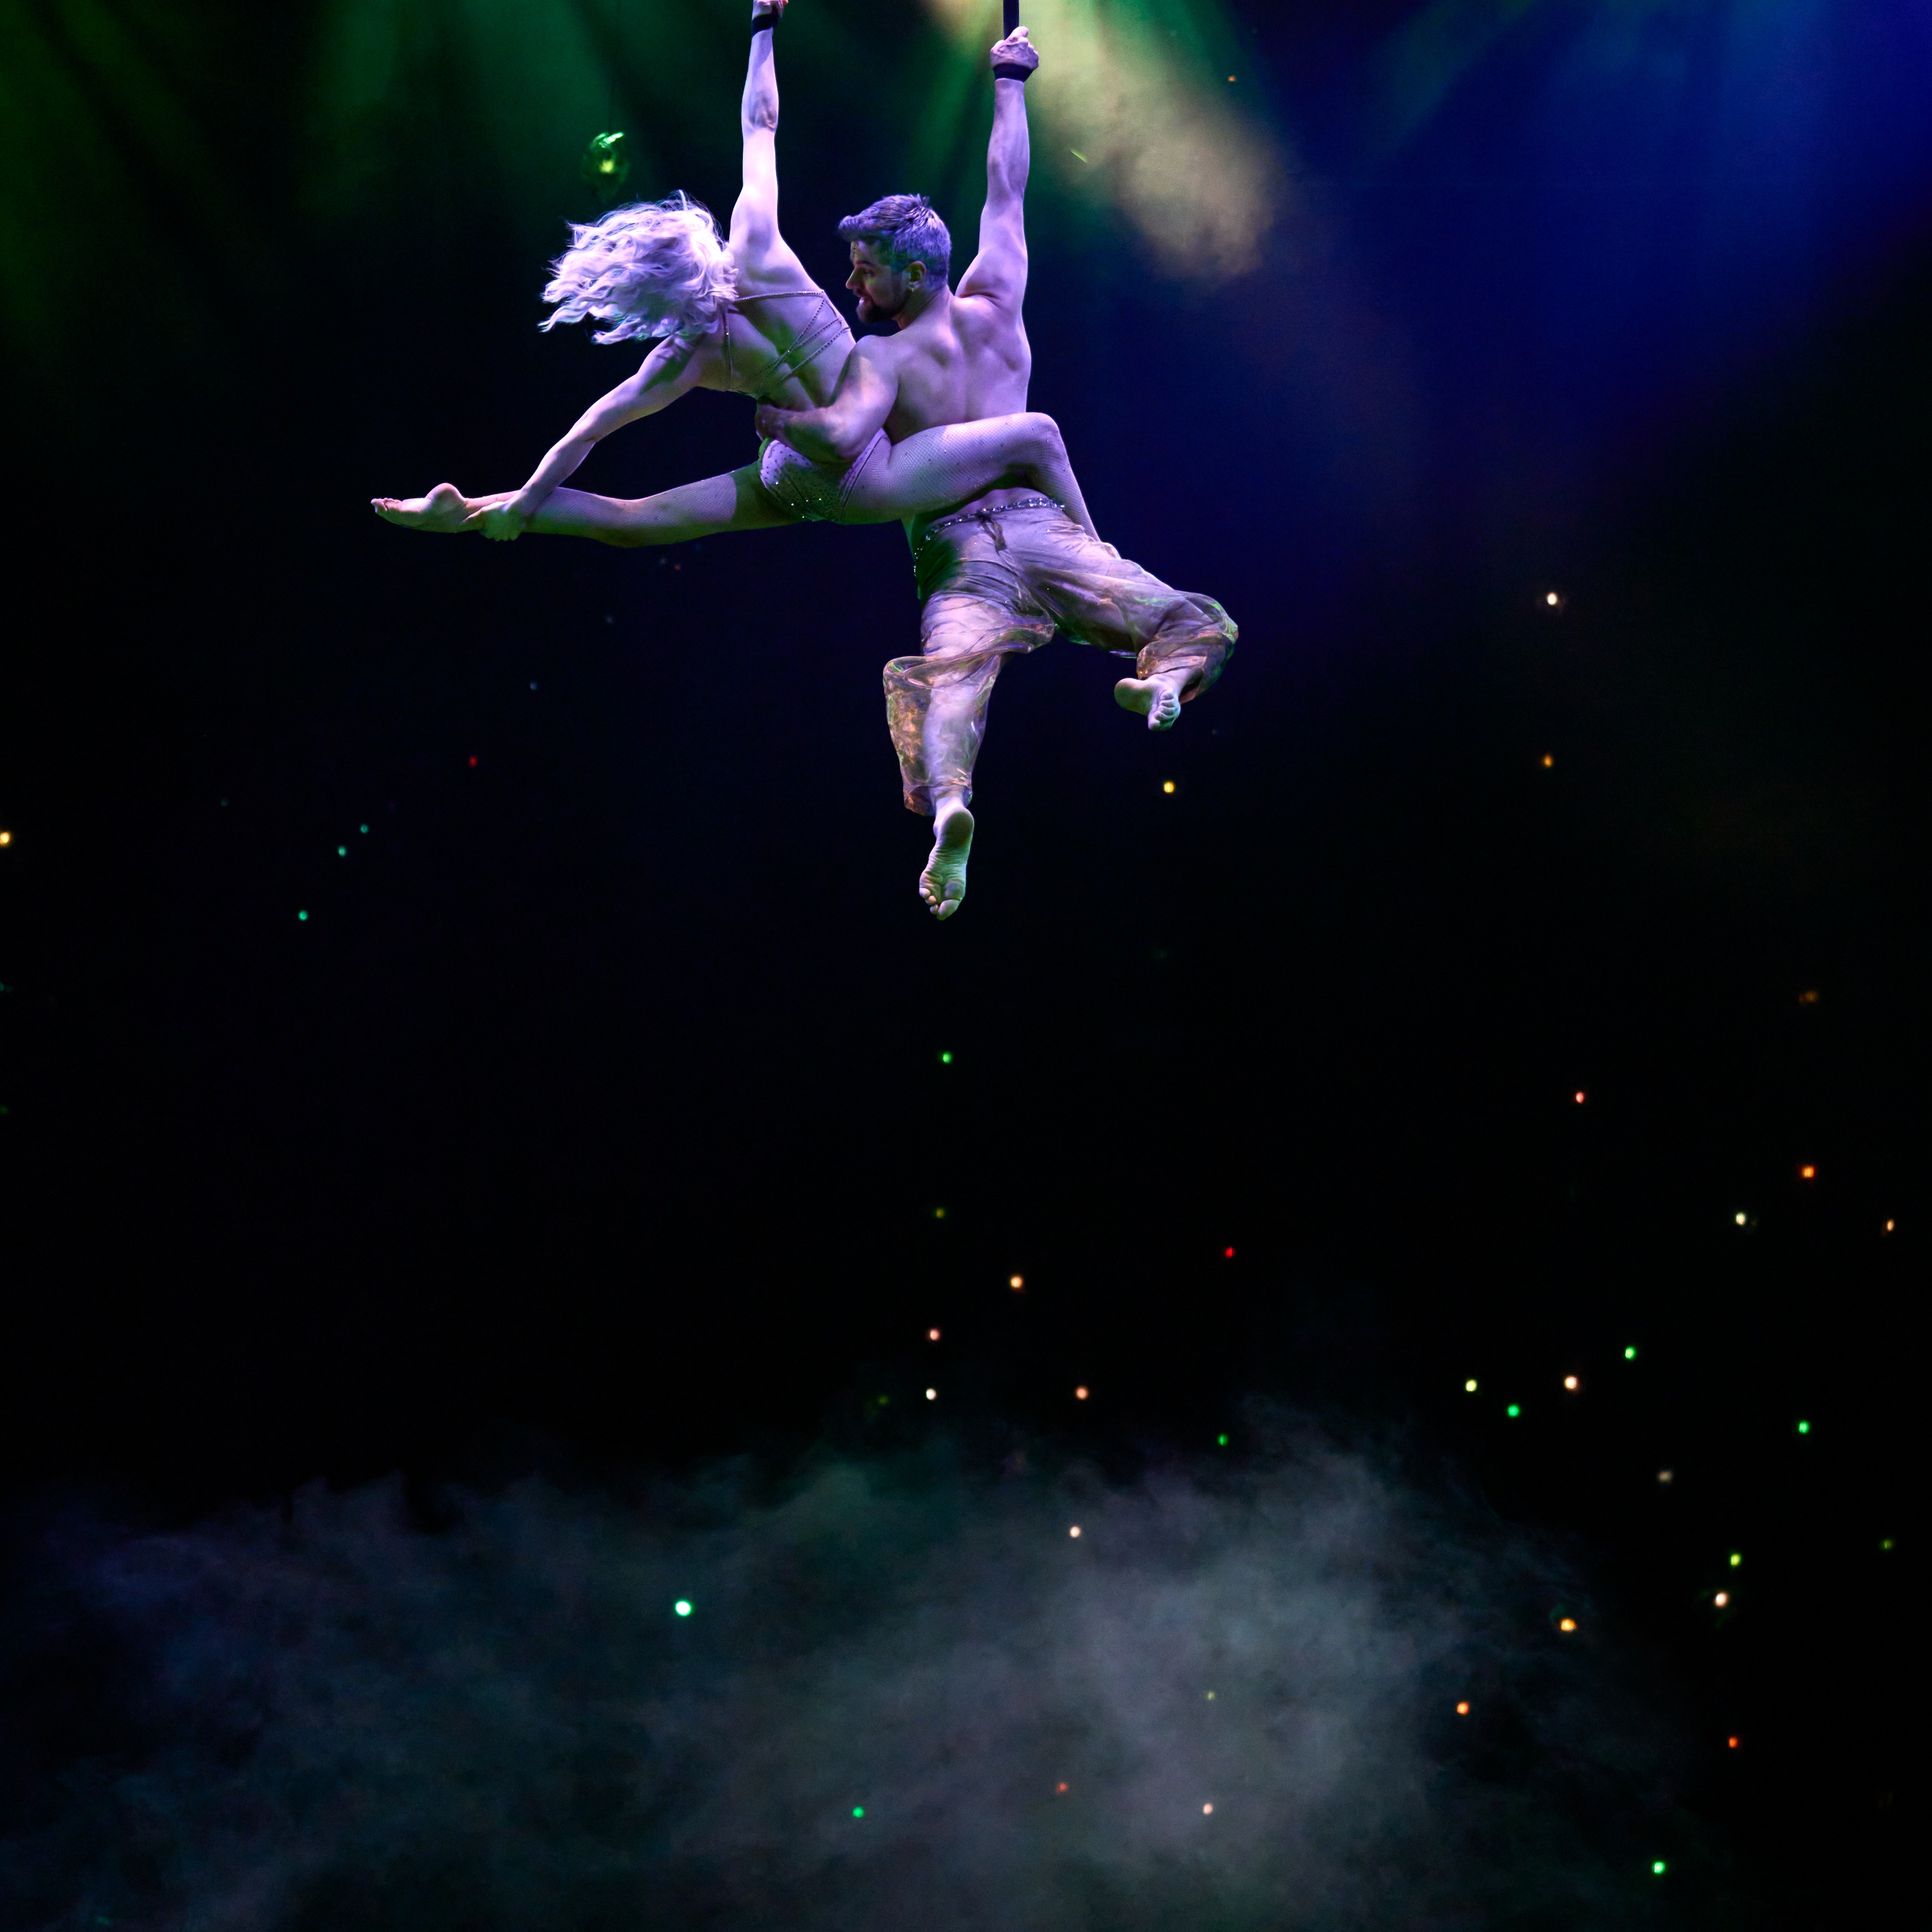 Awakening performers flying above stage in white costume